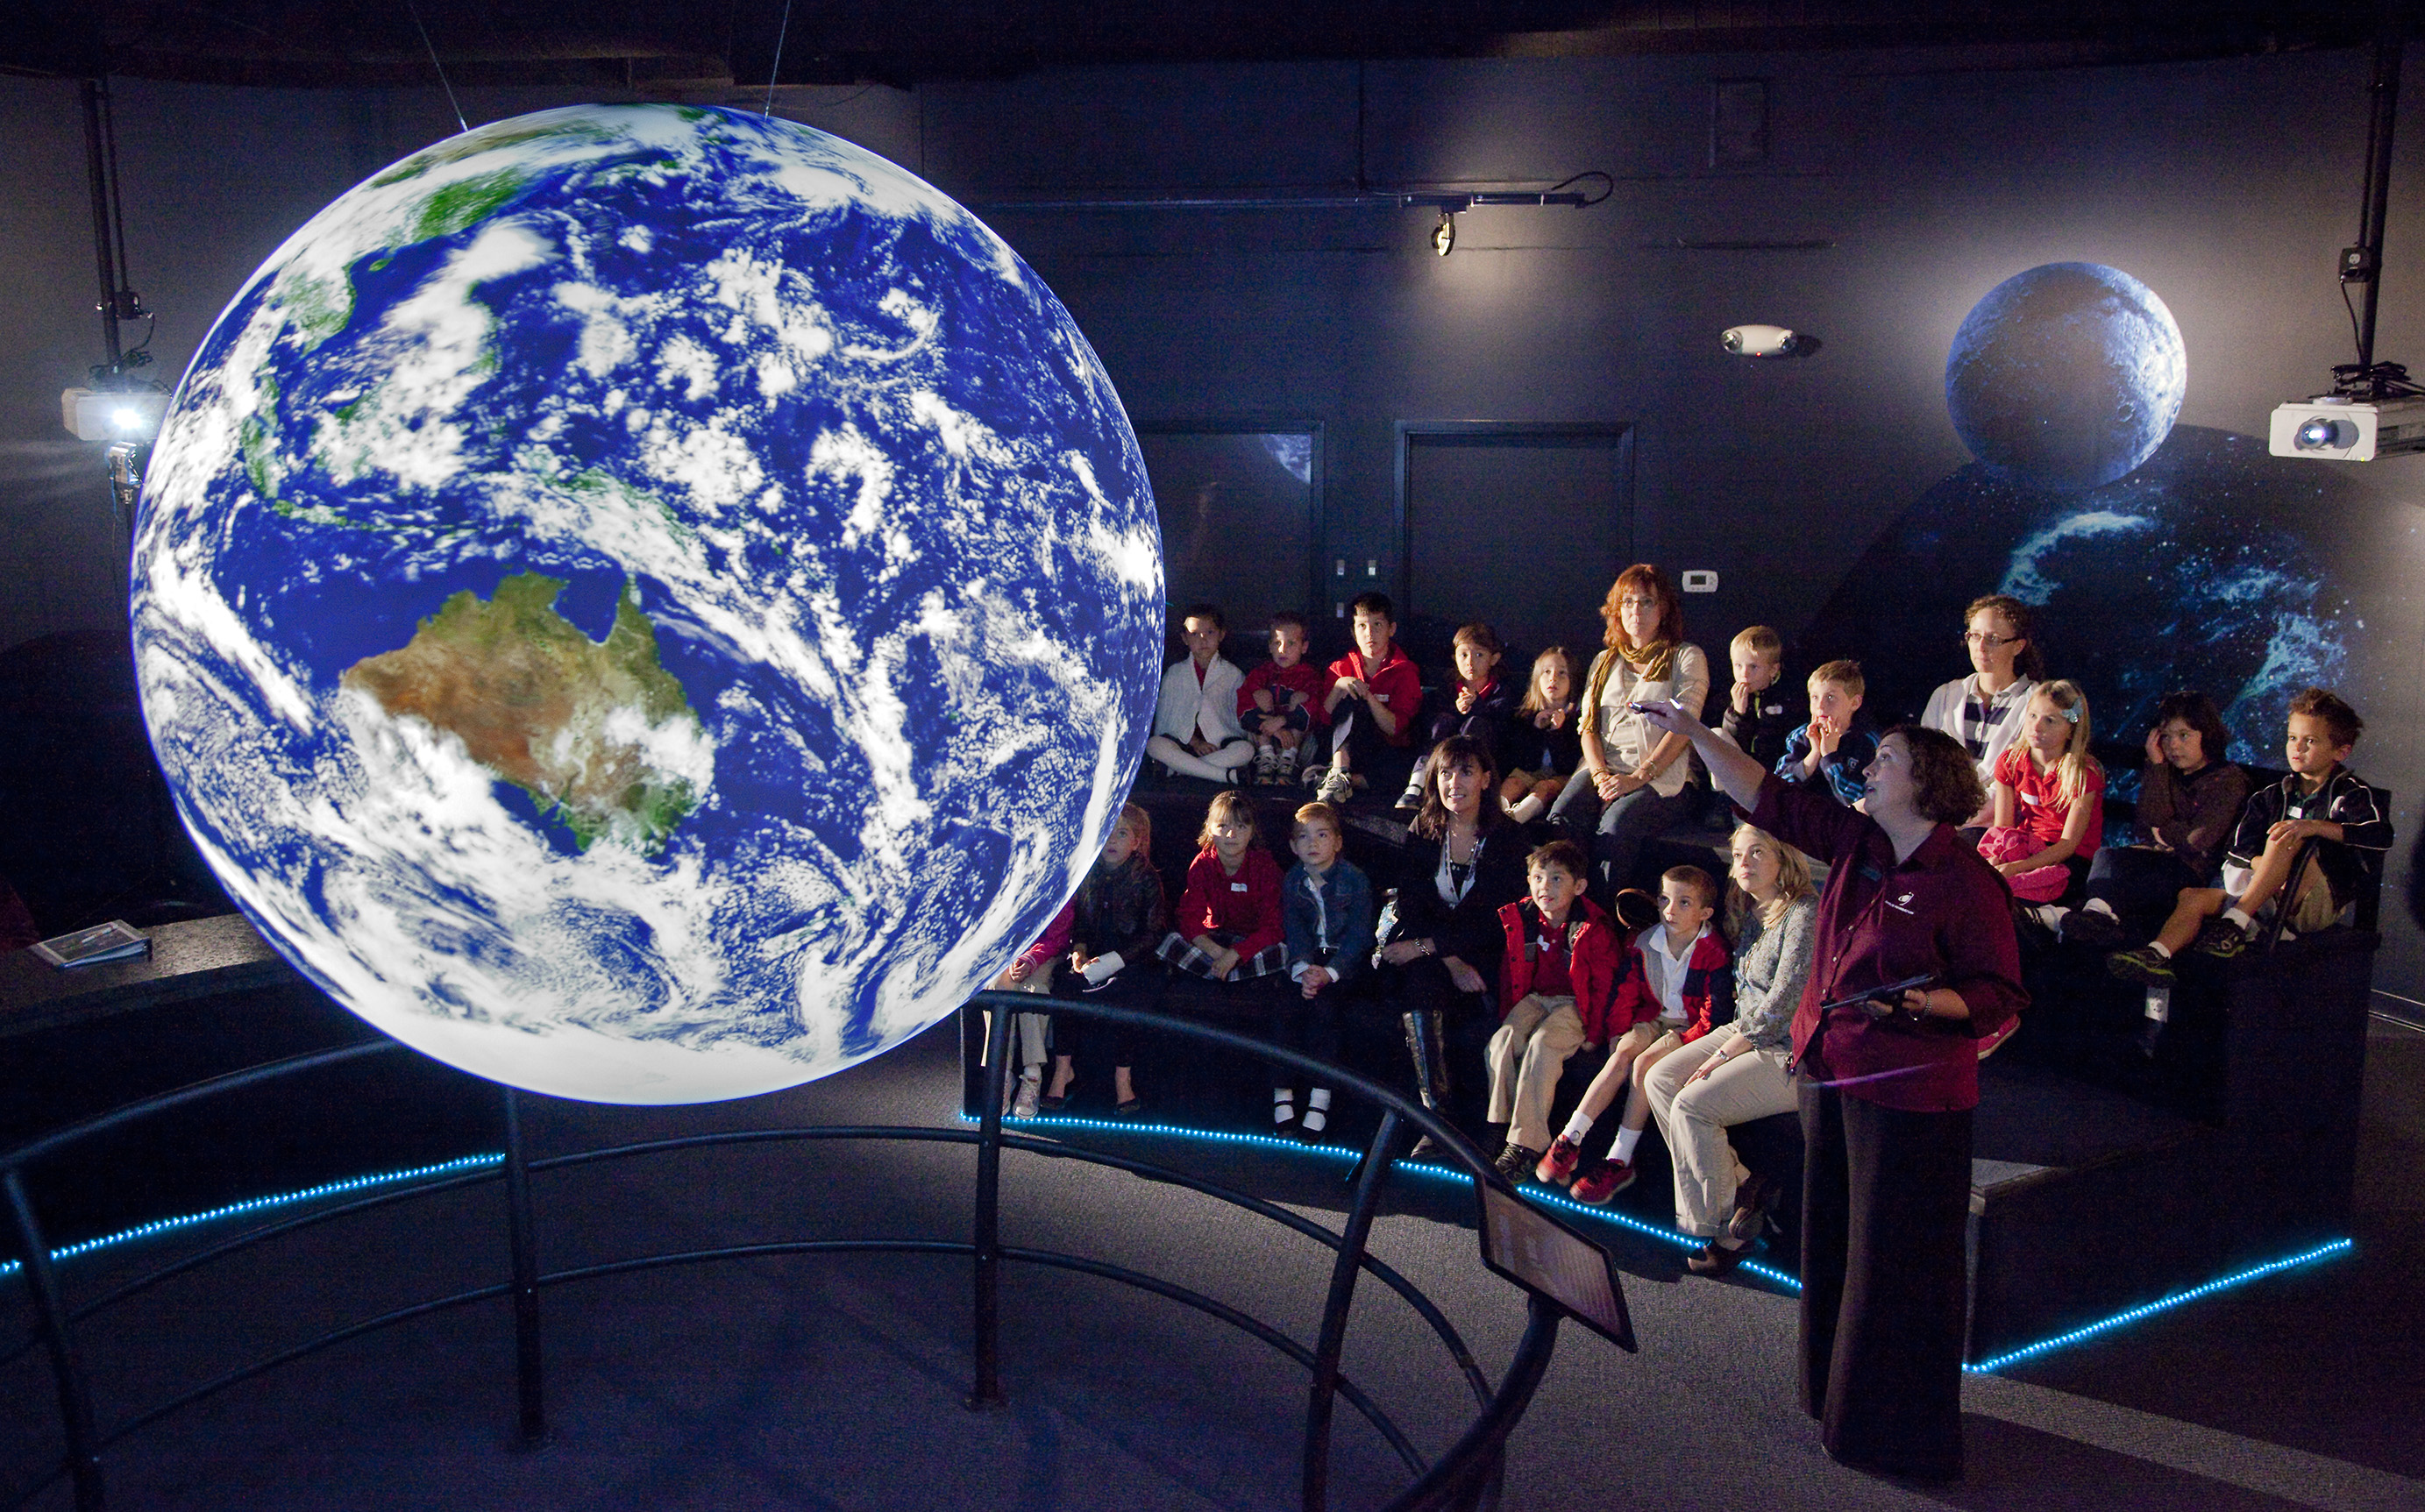 A group of school children sit on a set of terraced benches watching a presentation by a docent on Science On a Sphere